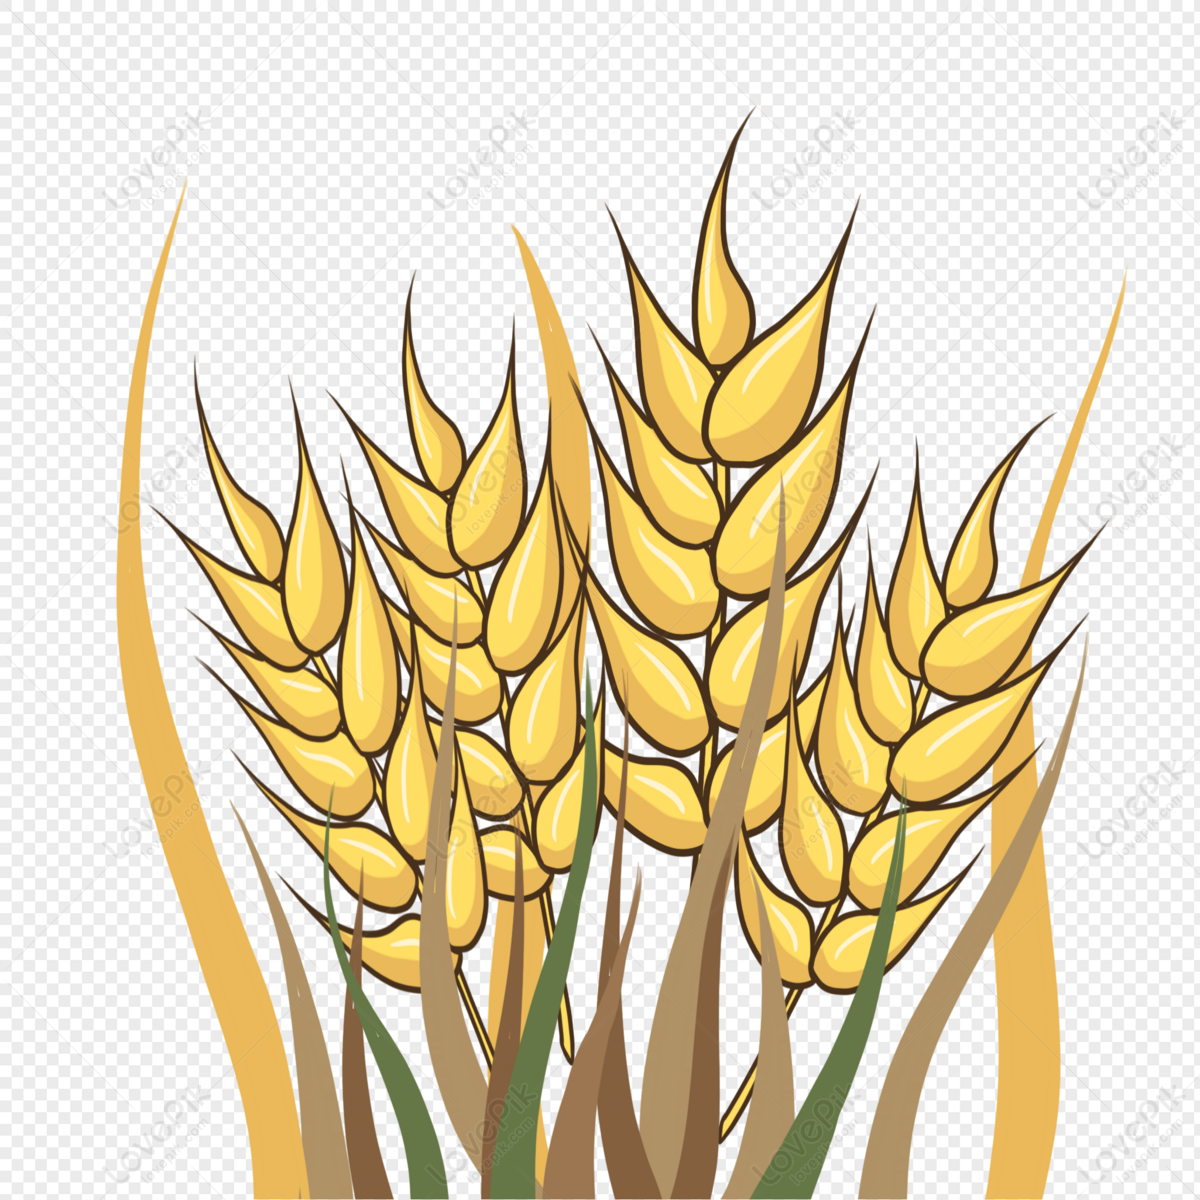 Cartoon Hand Drawn Crops Harvest Granules Full Of Wheat PNG Hd Transparent  Image And Clipart Image For Free Download - Lovepik | 401397034